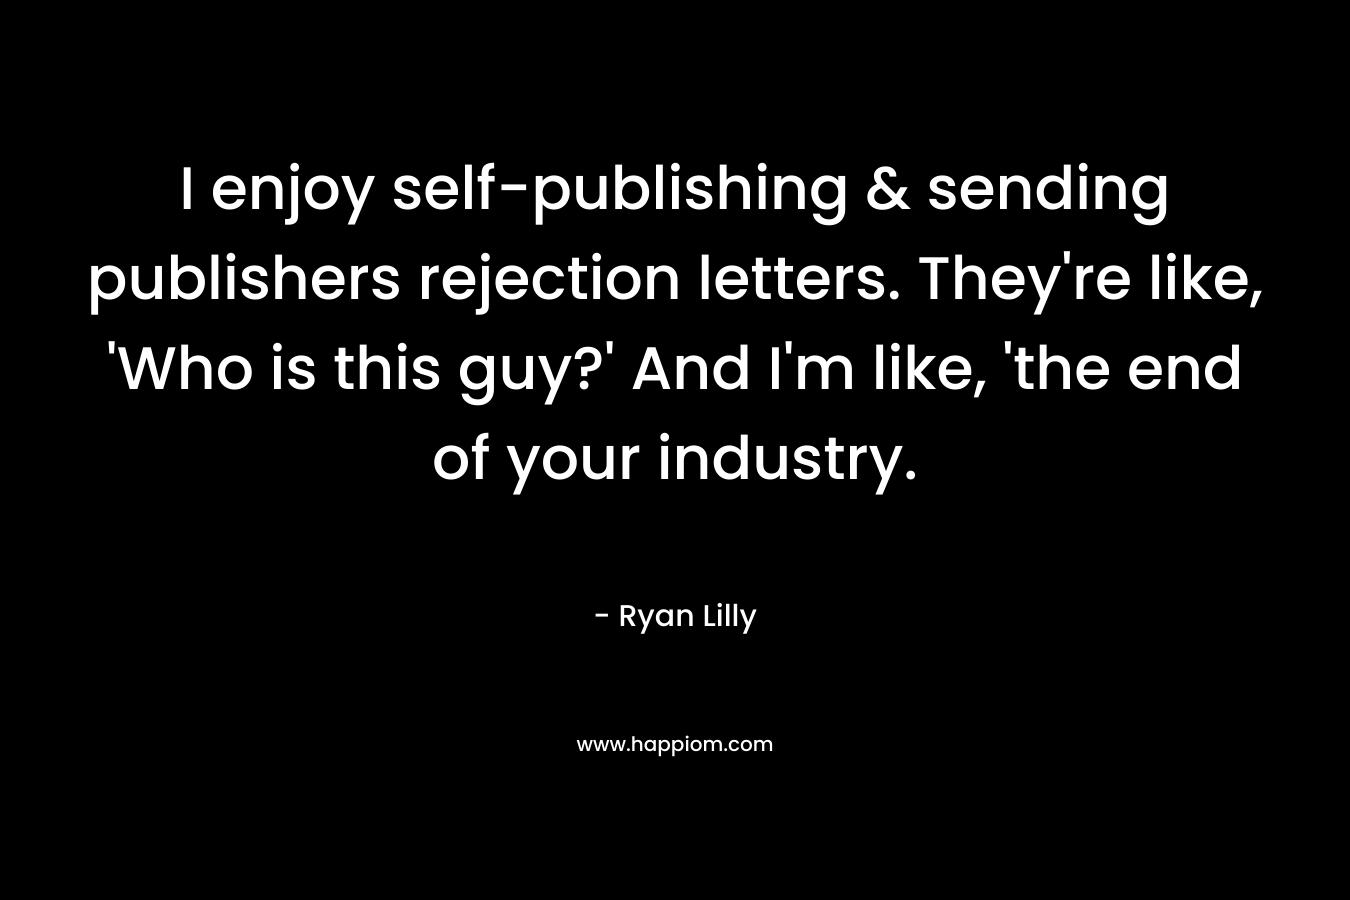 I enjoy self-publishing & sending publishers rejection letters. They’re like, ‘Who is this guy?’ And I’m like, ‘the end of your industry. – Ryan Lilly